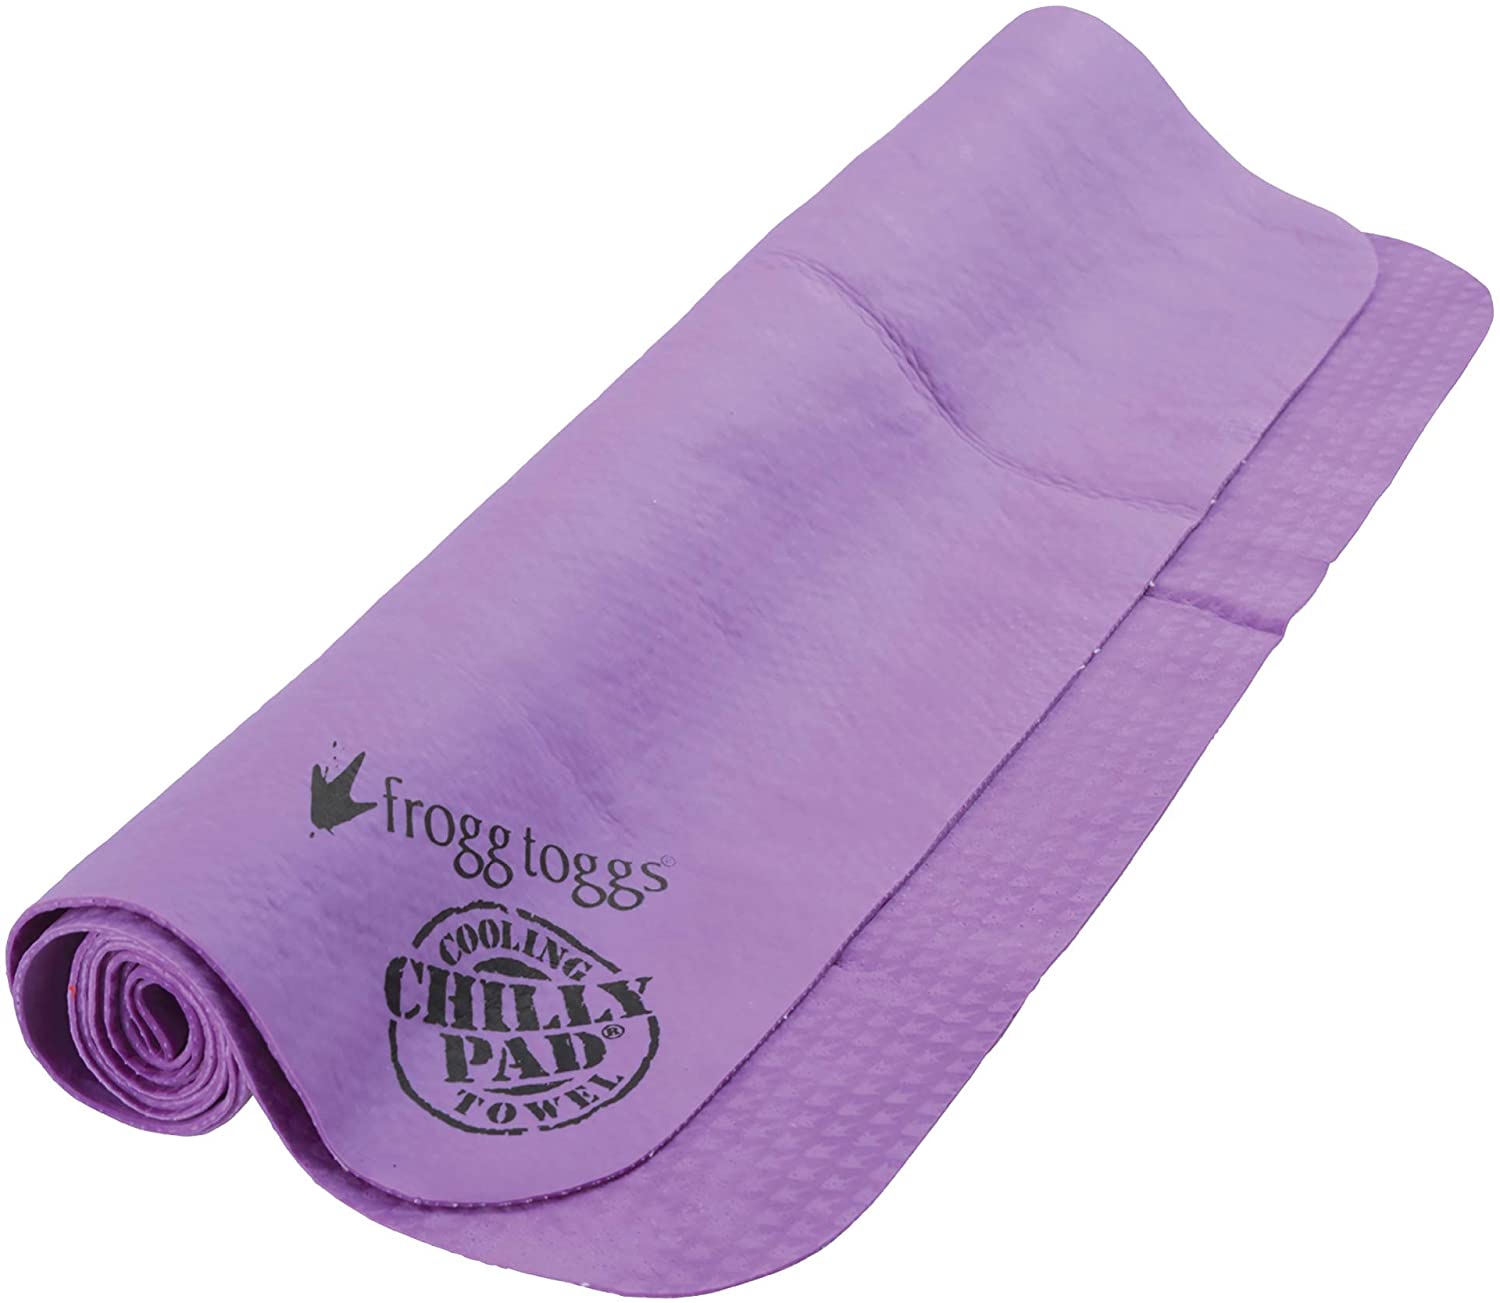 Hot Pink Frogg Toggs Chilly Pad Cooling LARGE Towel 33" x 13" 